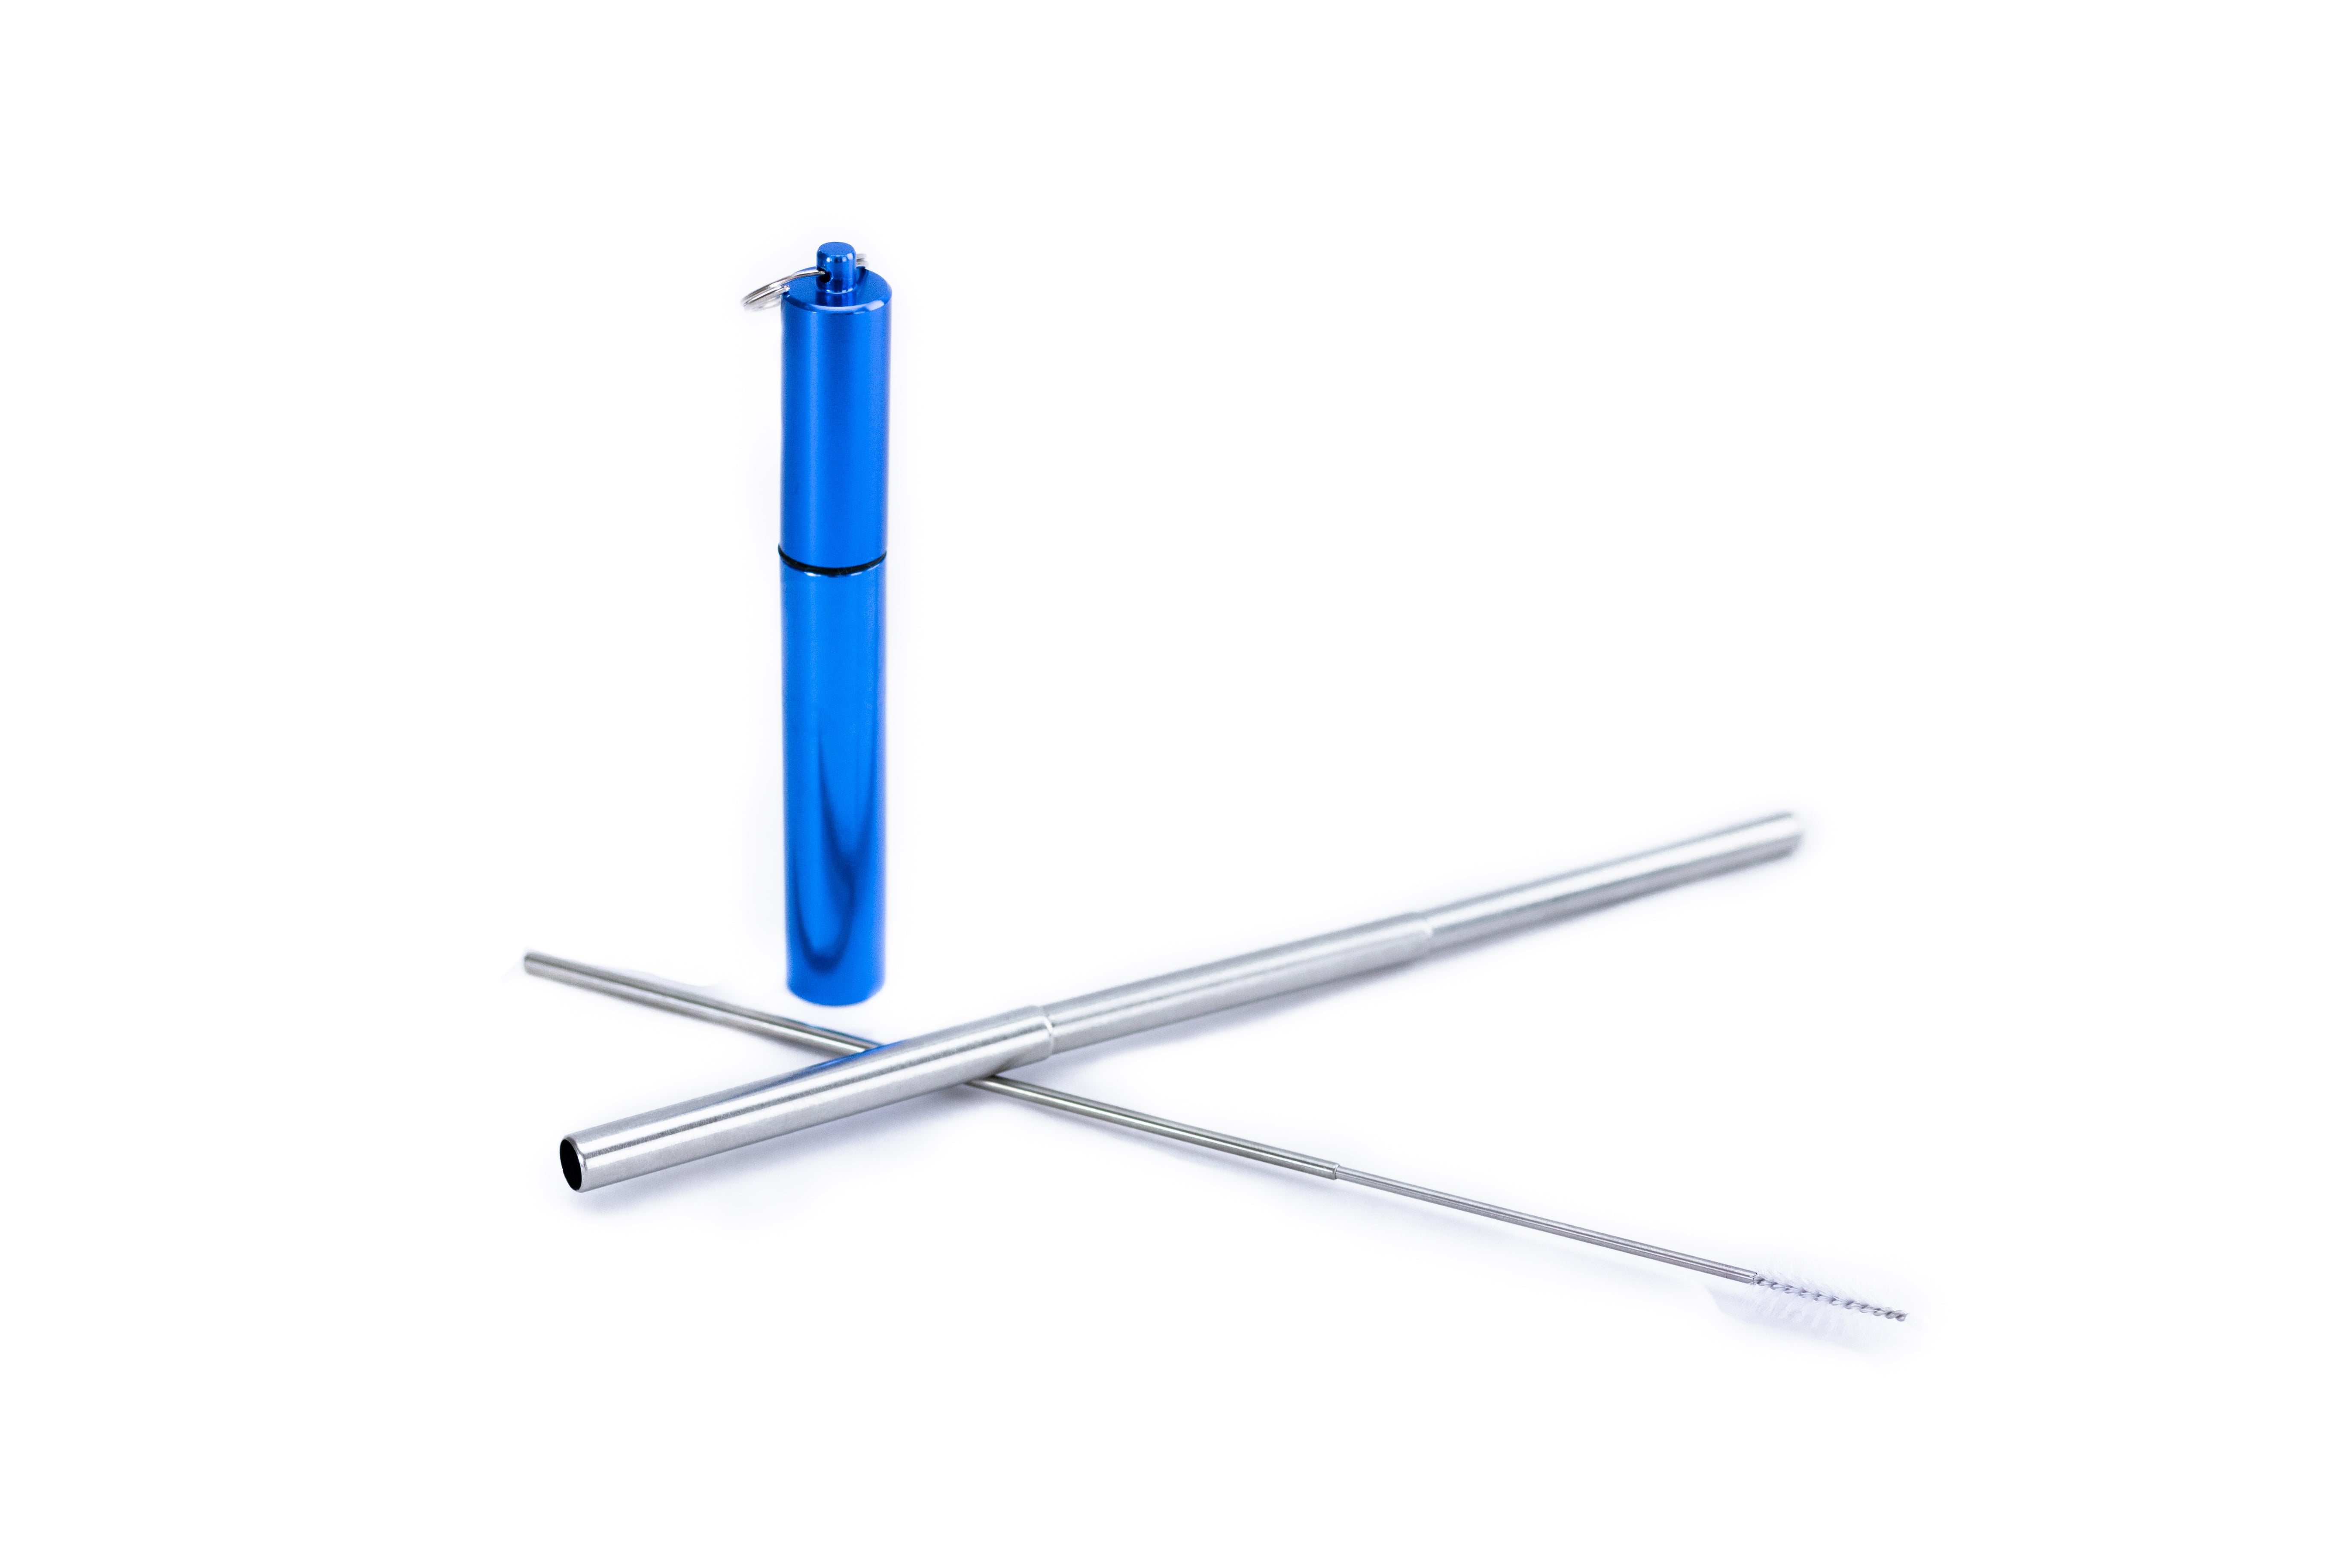 Extendable Stainless Steel Straw in Blue Carrying Case : Travel Straw Collection